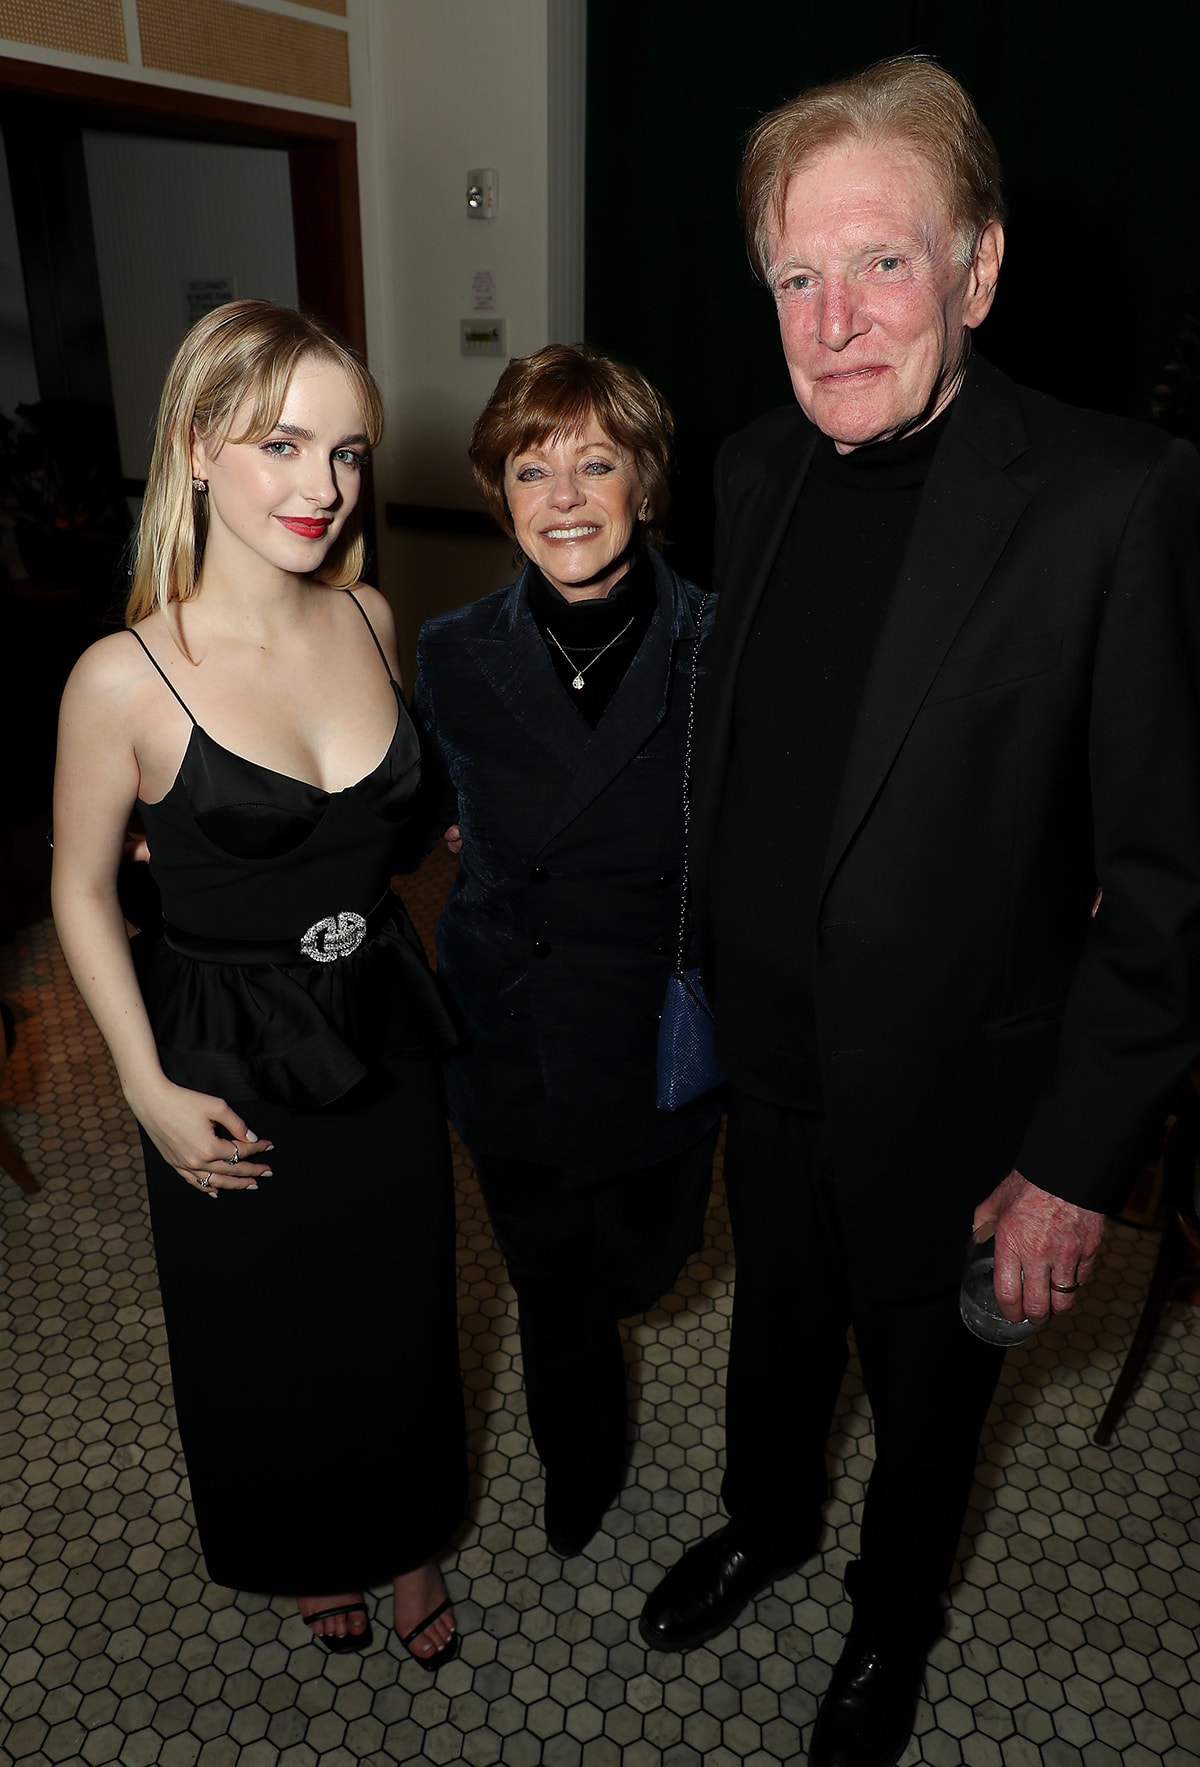 Mckenna Grace attends the Ghostbusters: Frozen Empire premiere after-party in a slinky black dress and open-toe sandals with co-star William Atherton and his wife Bobbi Goldin